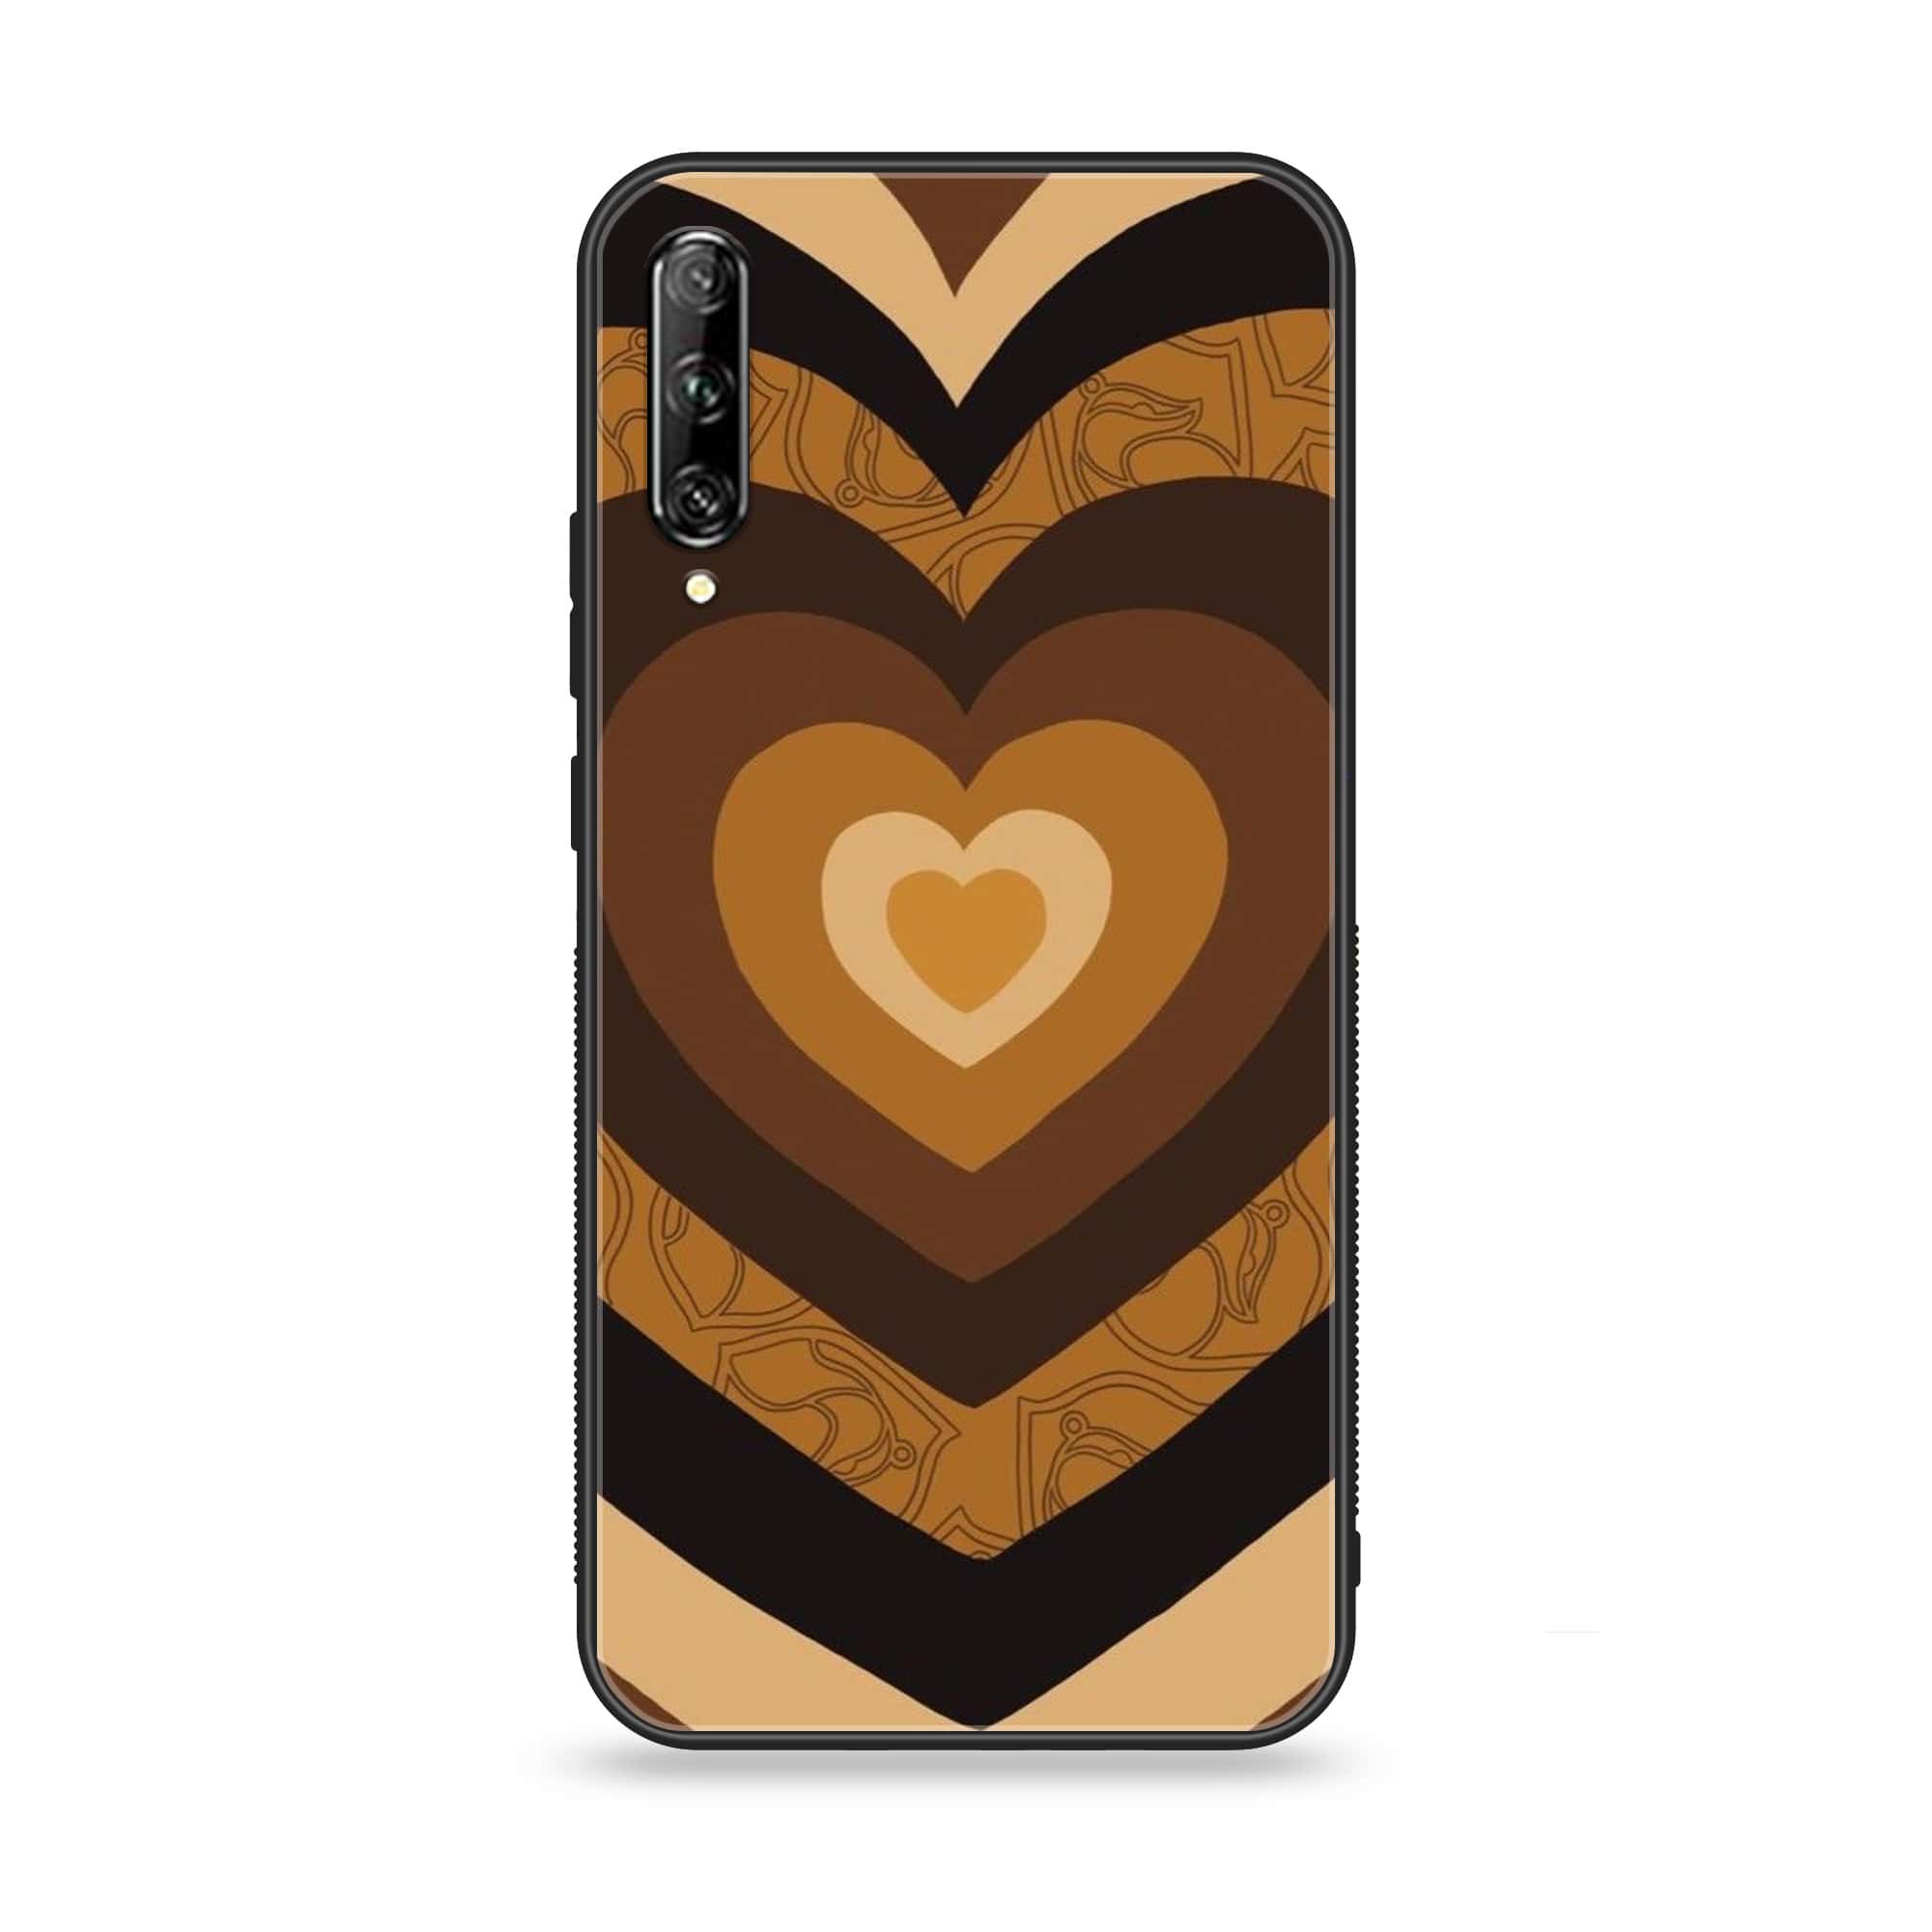 Huawei Y9s - Heart Beat 2.0 Series - Premium Printed Glass soft Bumper shock Proof Case